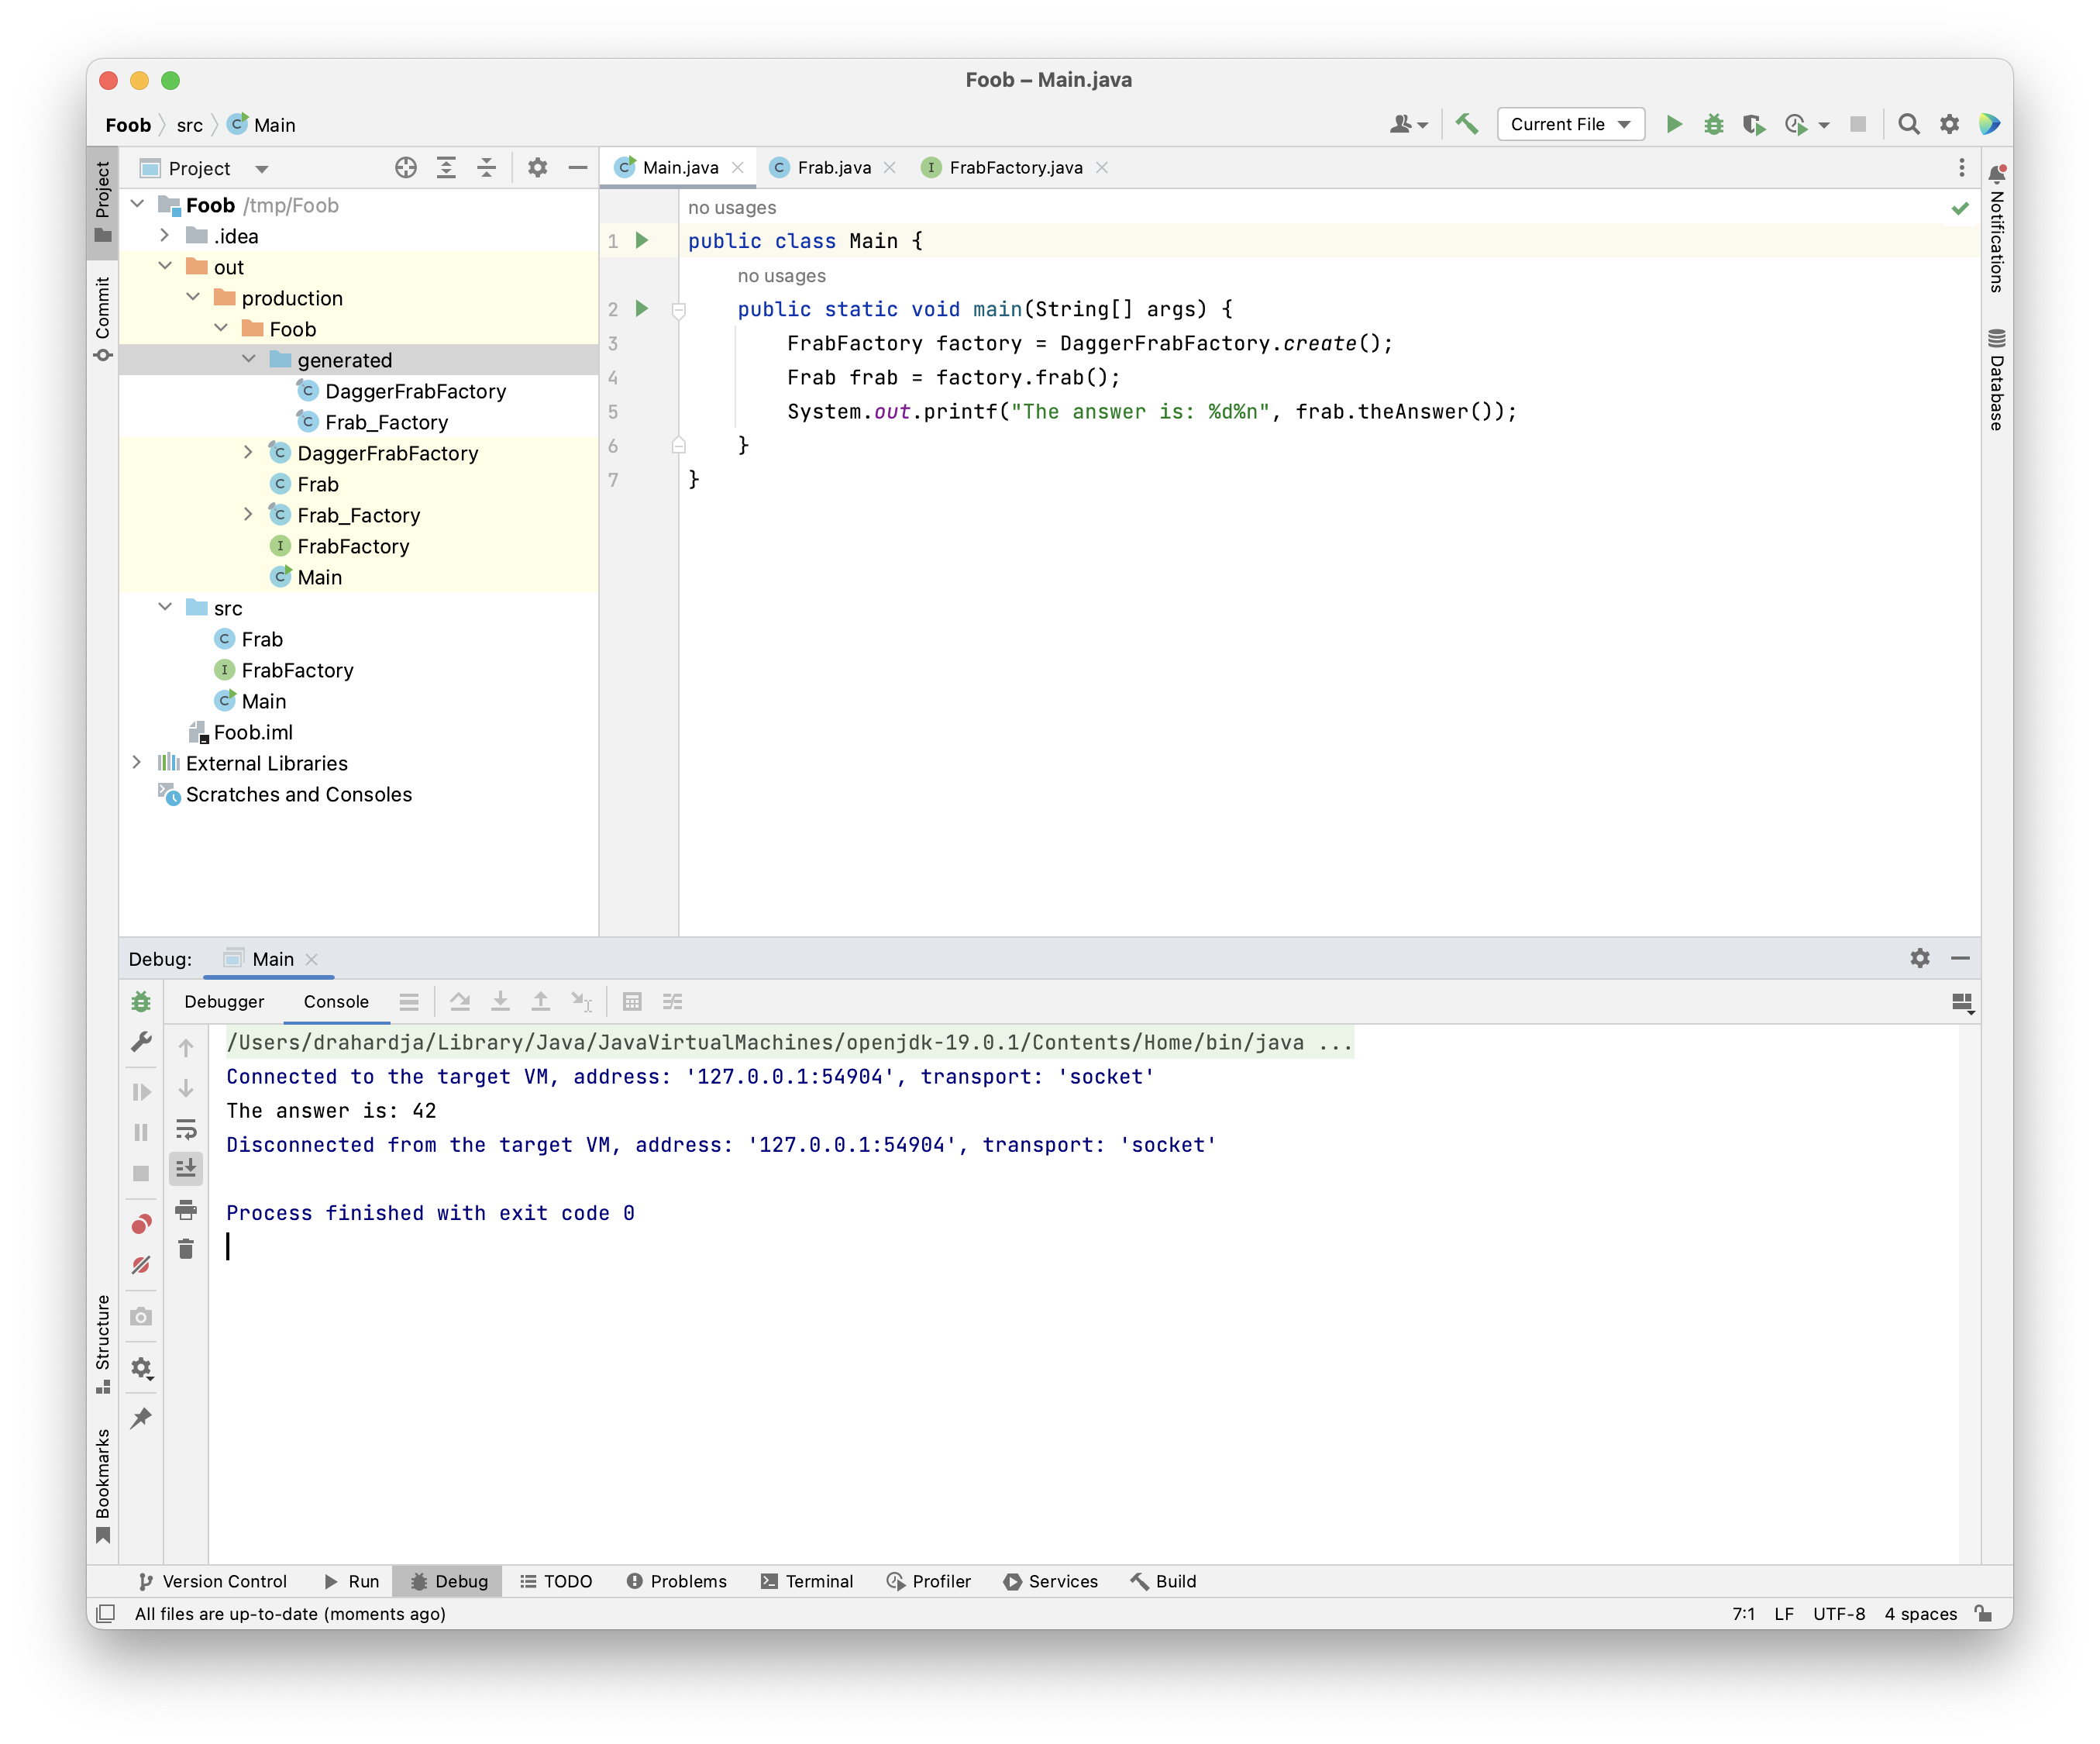 Main IDE view with a log of the program running to completion